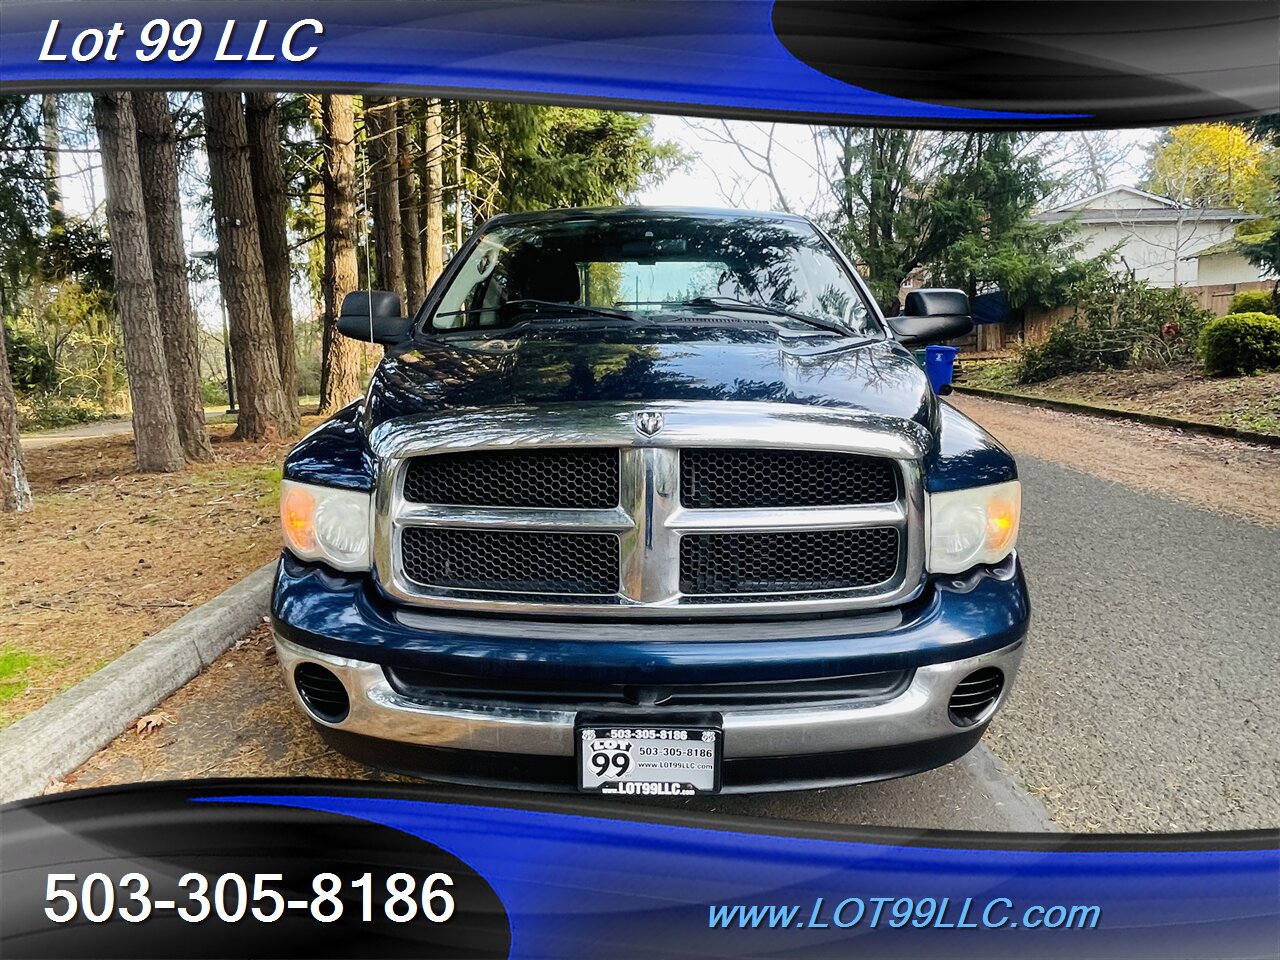 2004 Dodge Ram 1500 SLT ** 97k Miles ** 5.7L V8 ARE Canopy Tow Pack   - Photo 3 - Milwaukie, OR 97267